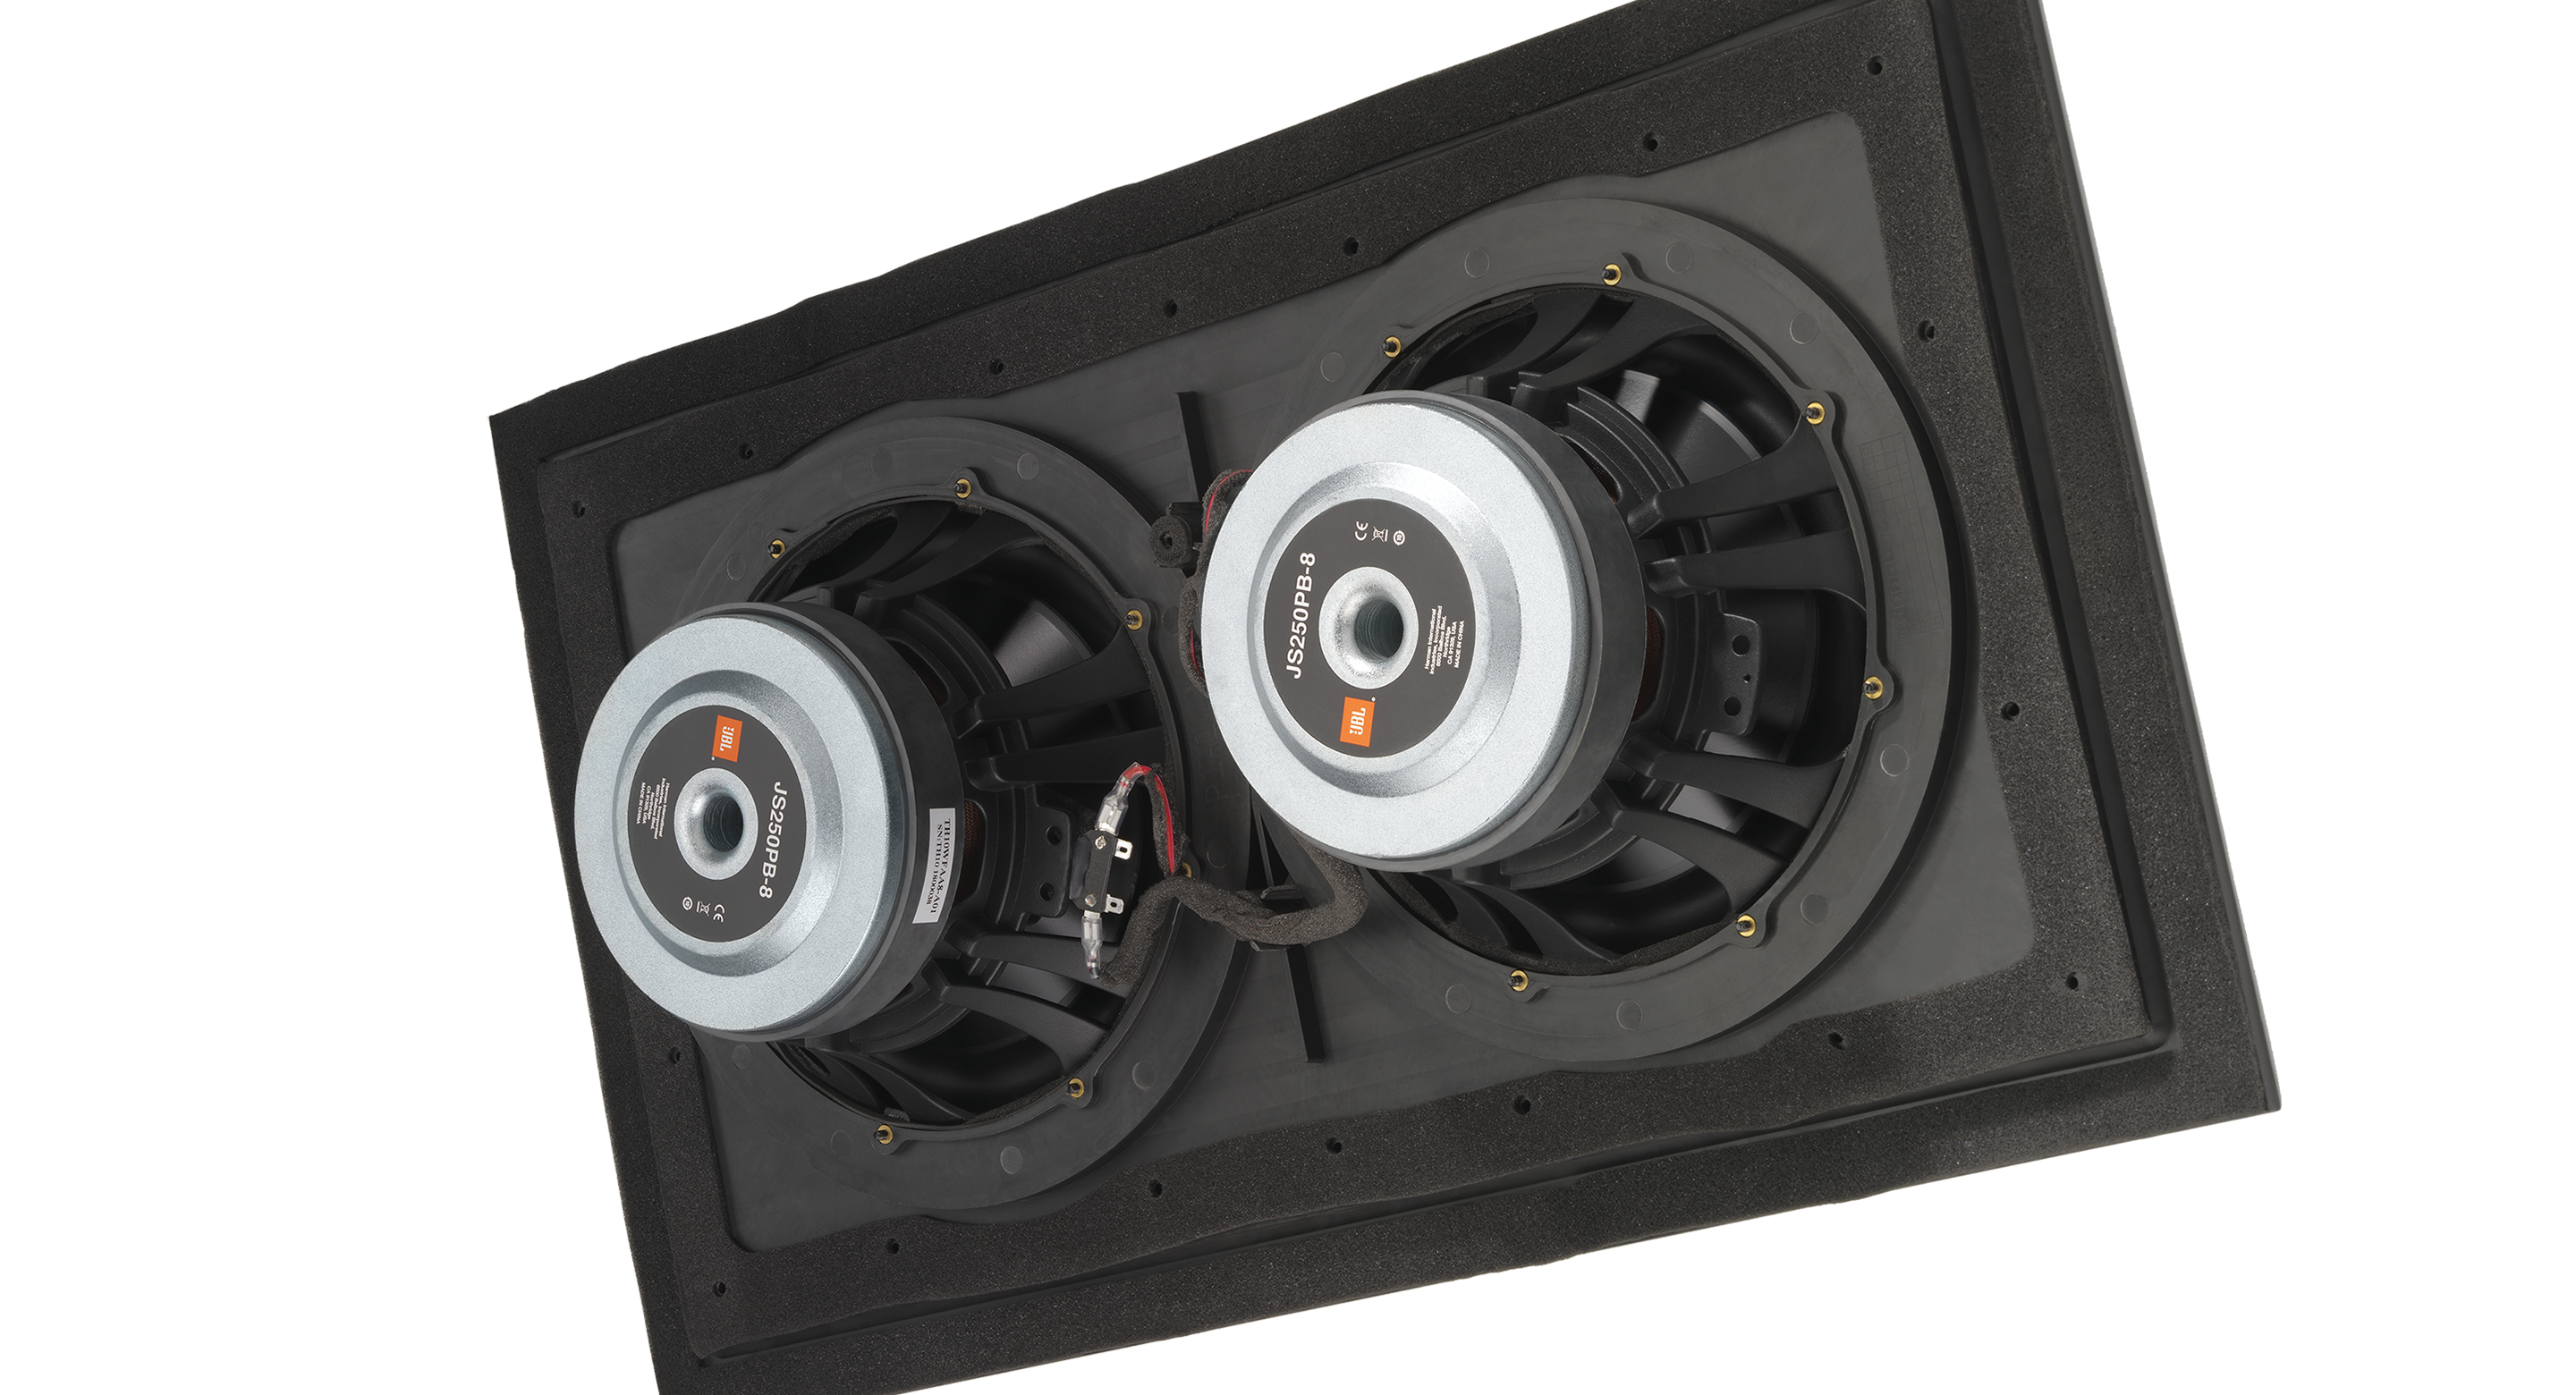 Dual 10" (250mm) Cast-frame, Composite Cone Woofers with 2.5-inch (63mm) Voice Coils